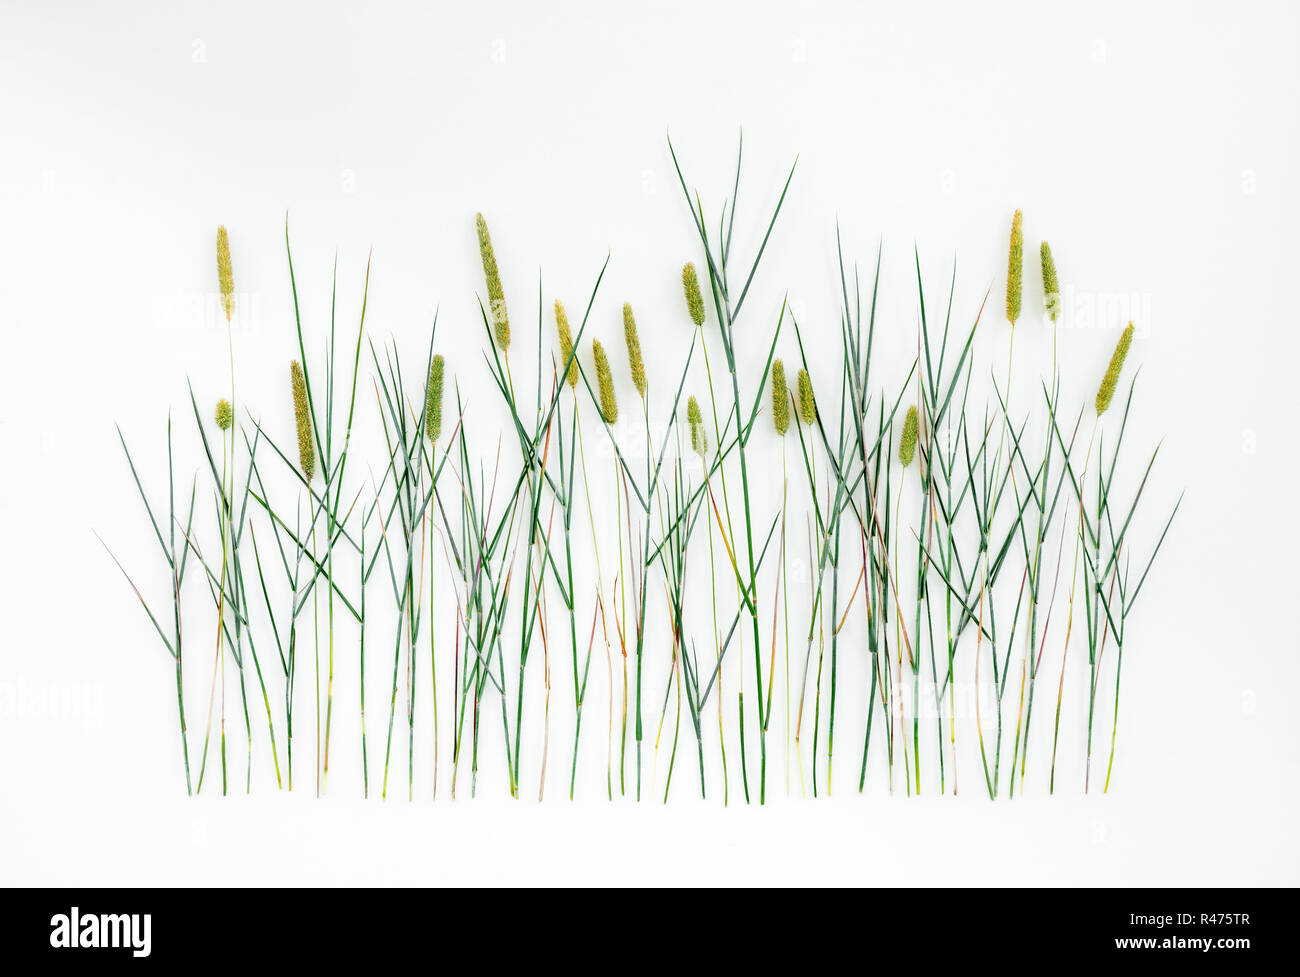 Timothy grass (Phleum Pratense) on white background. Wild grass with seed heads. Stock Photo